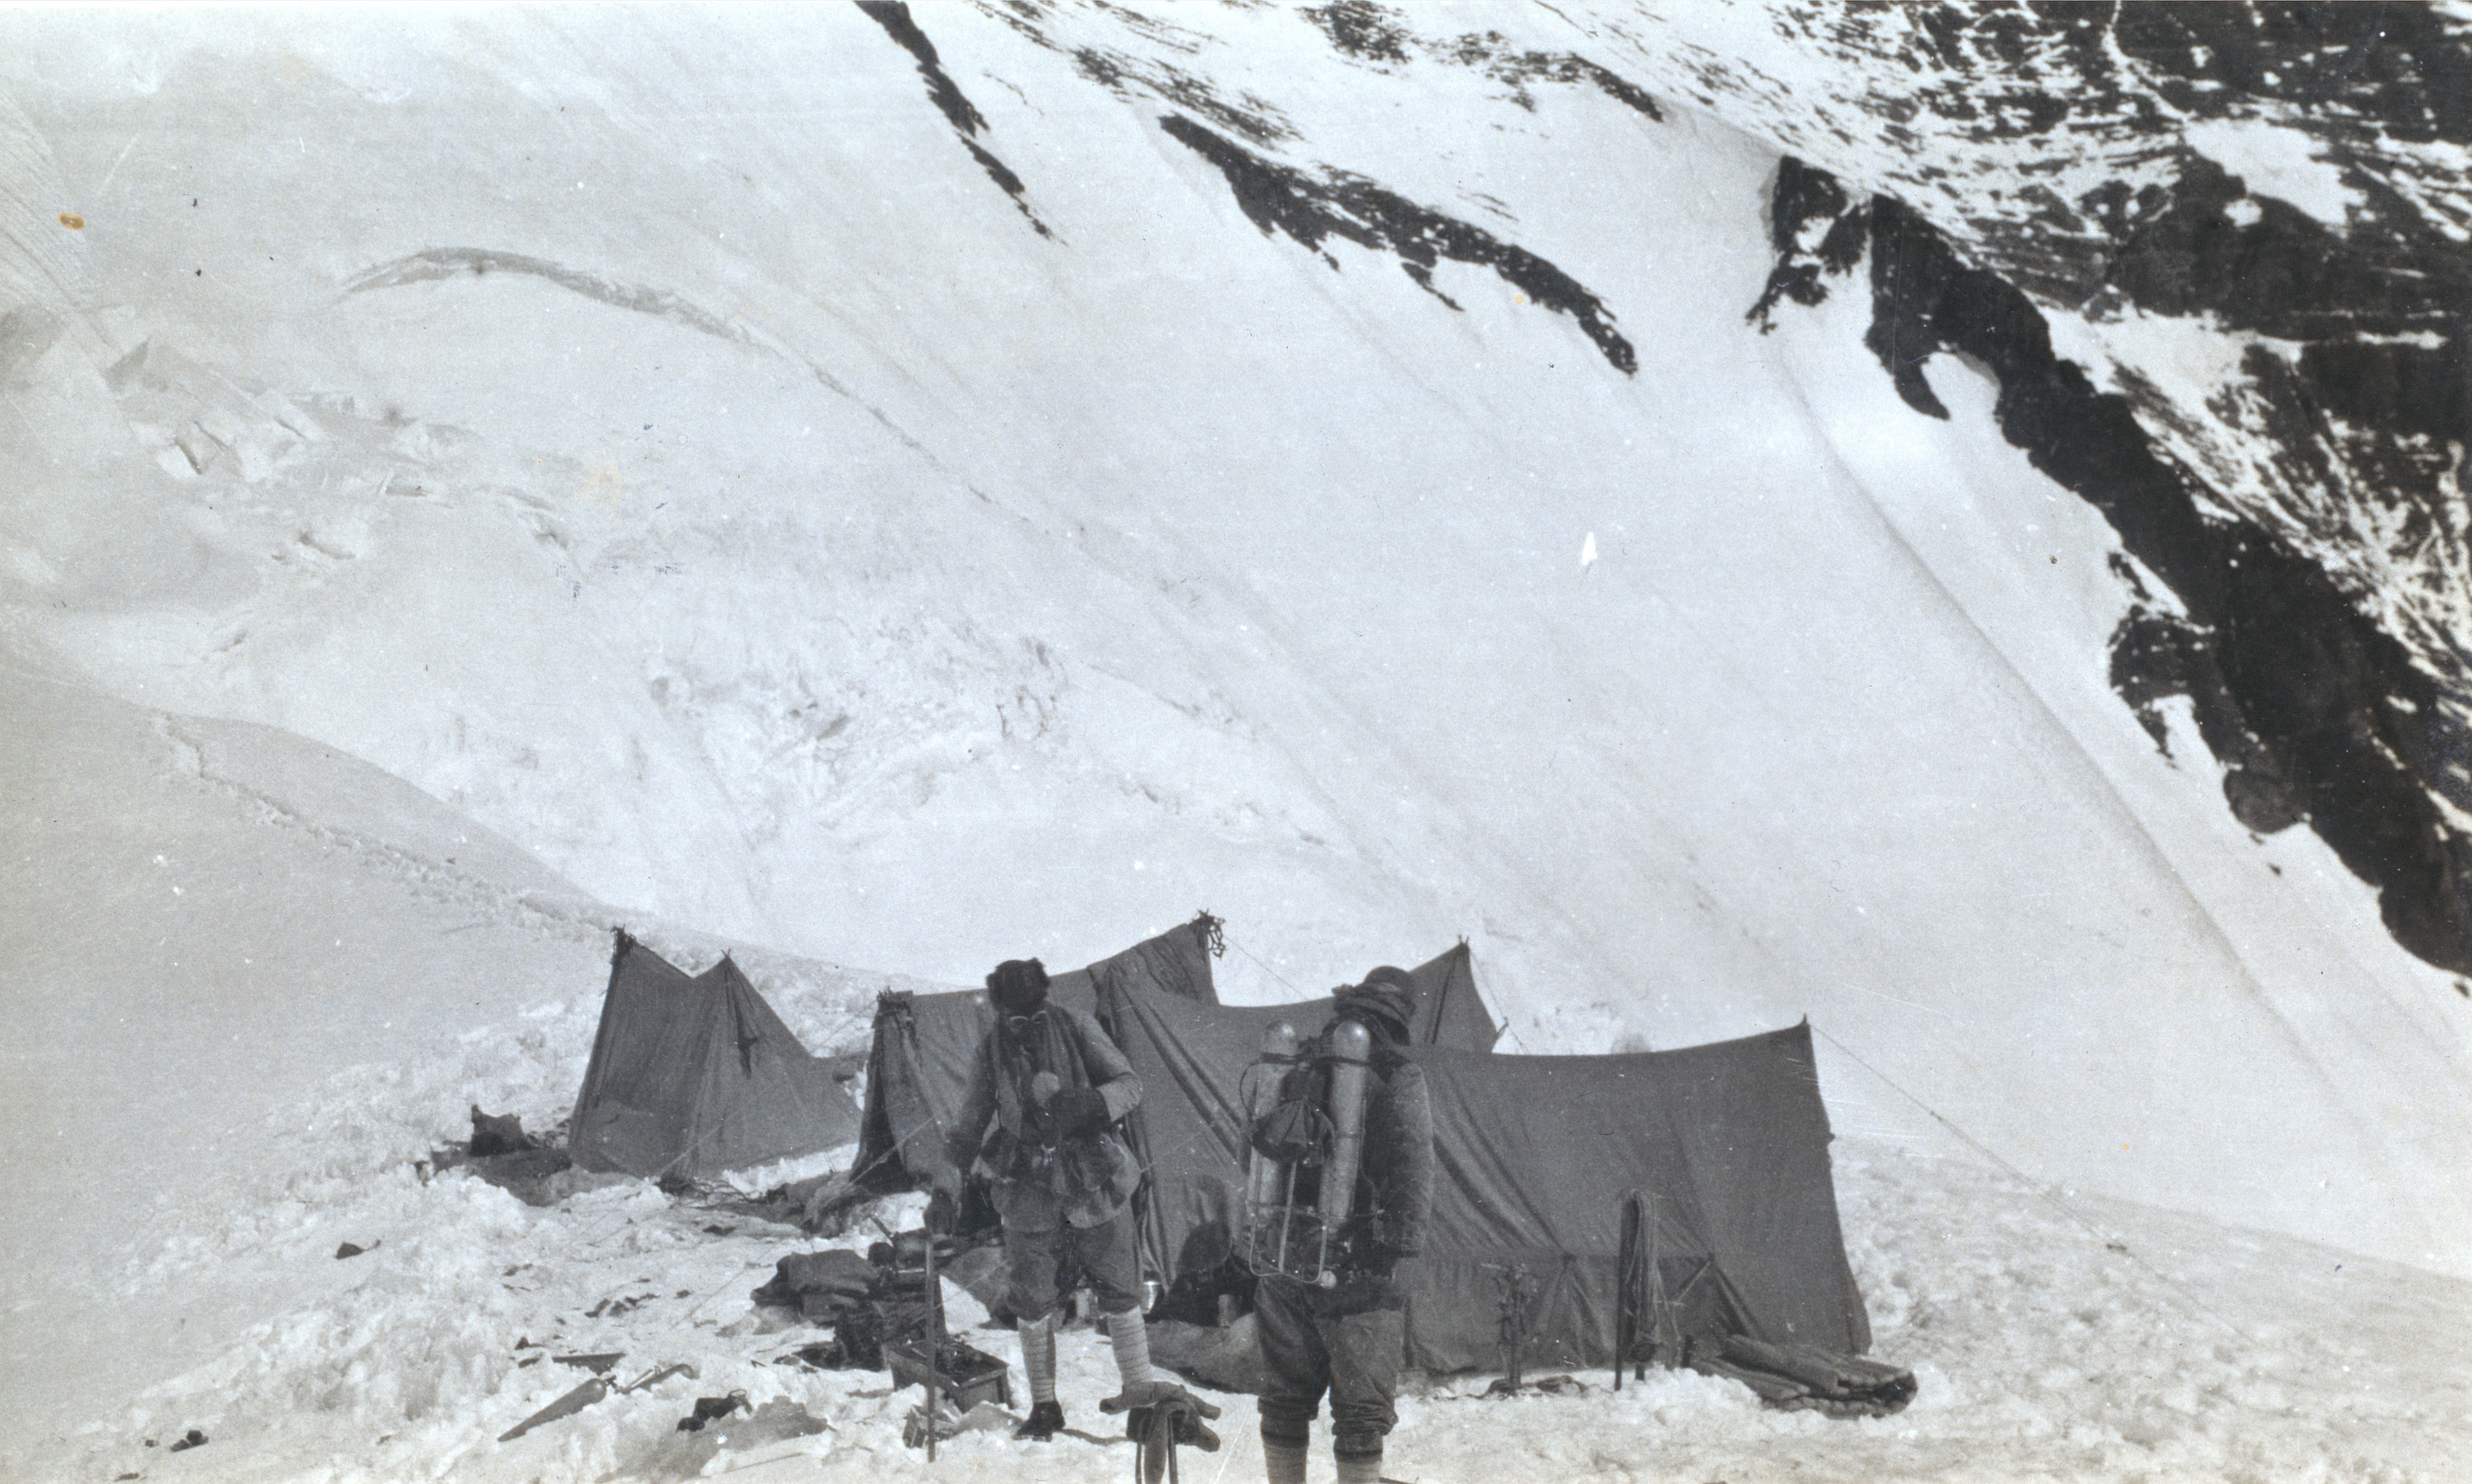 The last image taken of George Mallory (left) and Sandy Irvine leaving for the North Col of Everest, China (Tibet), June 1924